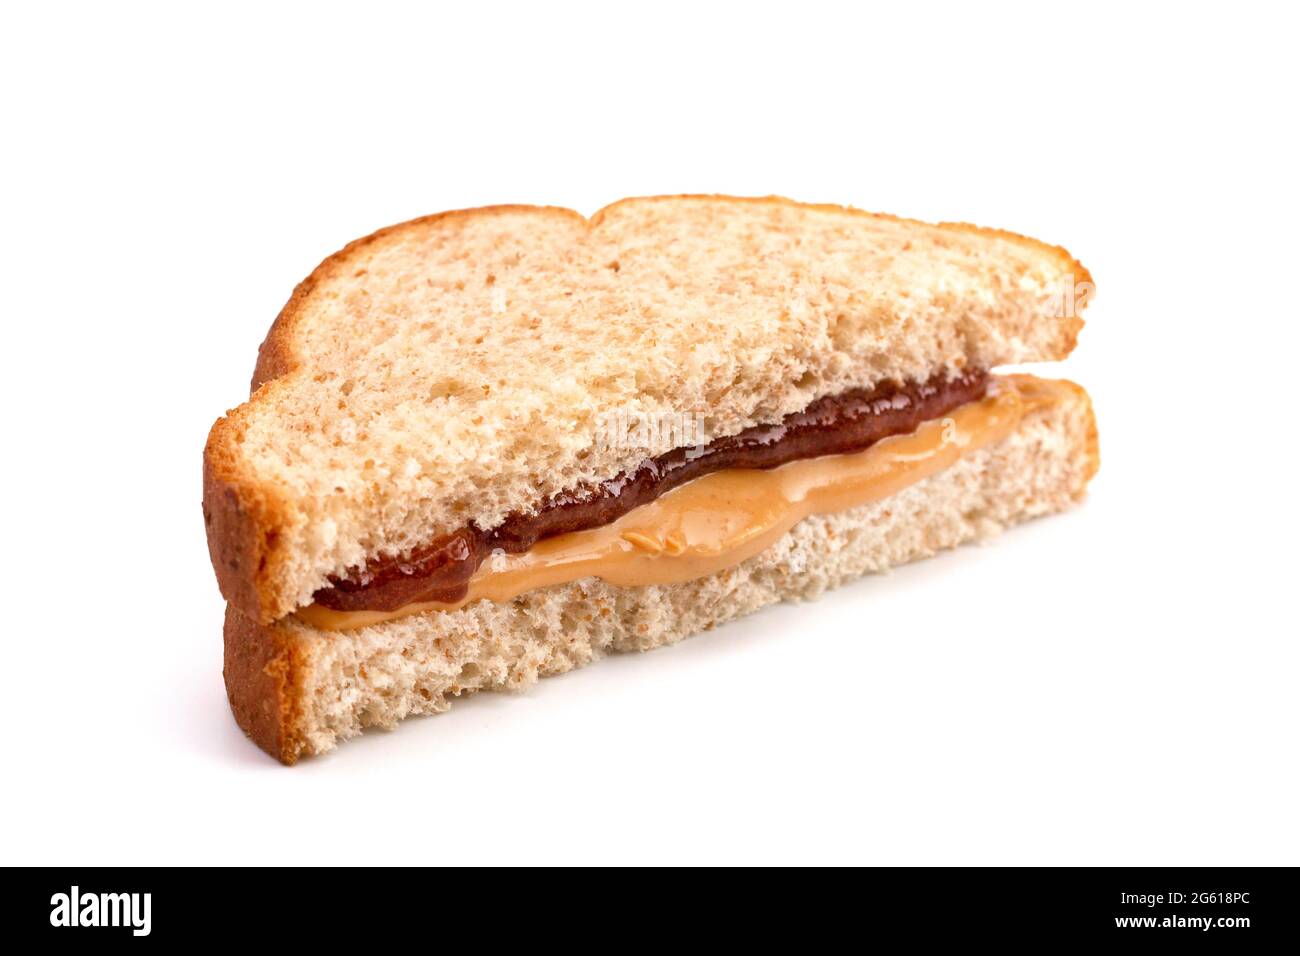 Classic Peanut Butter And Strawberry Jelly Sandwich On Wheat Bread Stock Photo Alamy